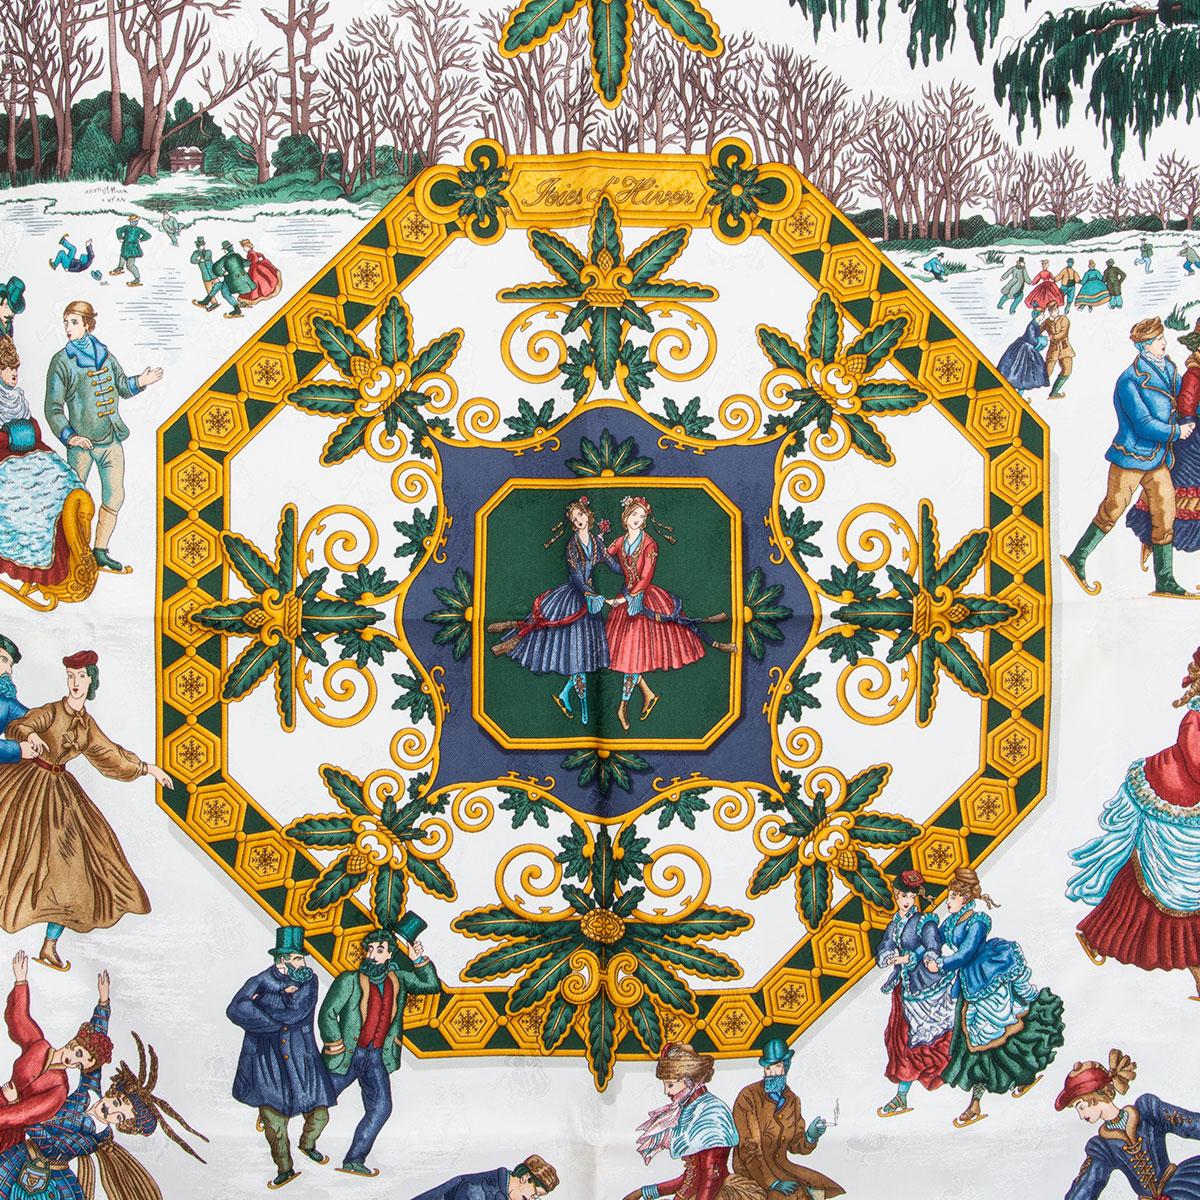 
100% authentic Hermes 'Les Joies d'Hiver 90' scarf by Joachim Metz in white silk (100%) with ice skaters jacquard. Blue border and details in gold, green, red and blue. Have been worn and are in excellent condition.

Width 90cm (35.1in)
Height 90cm